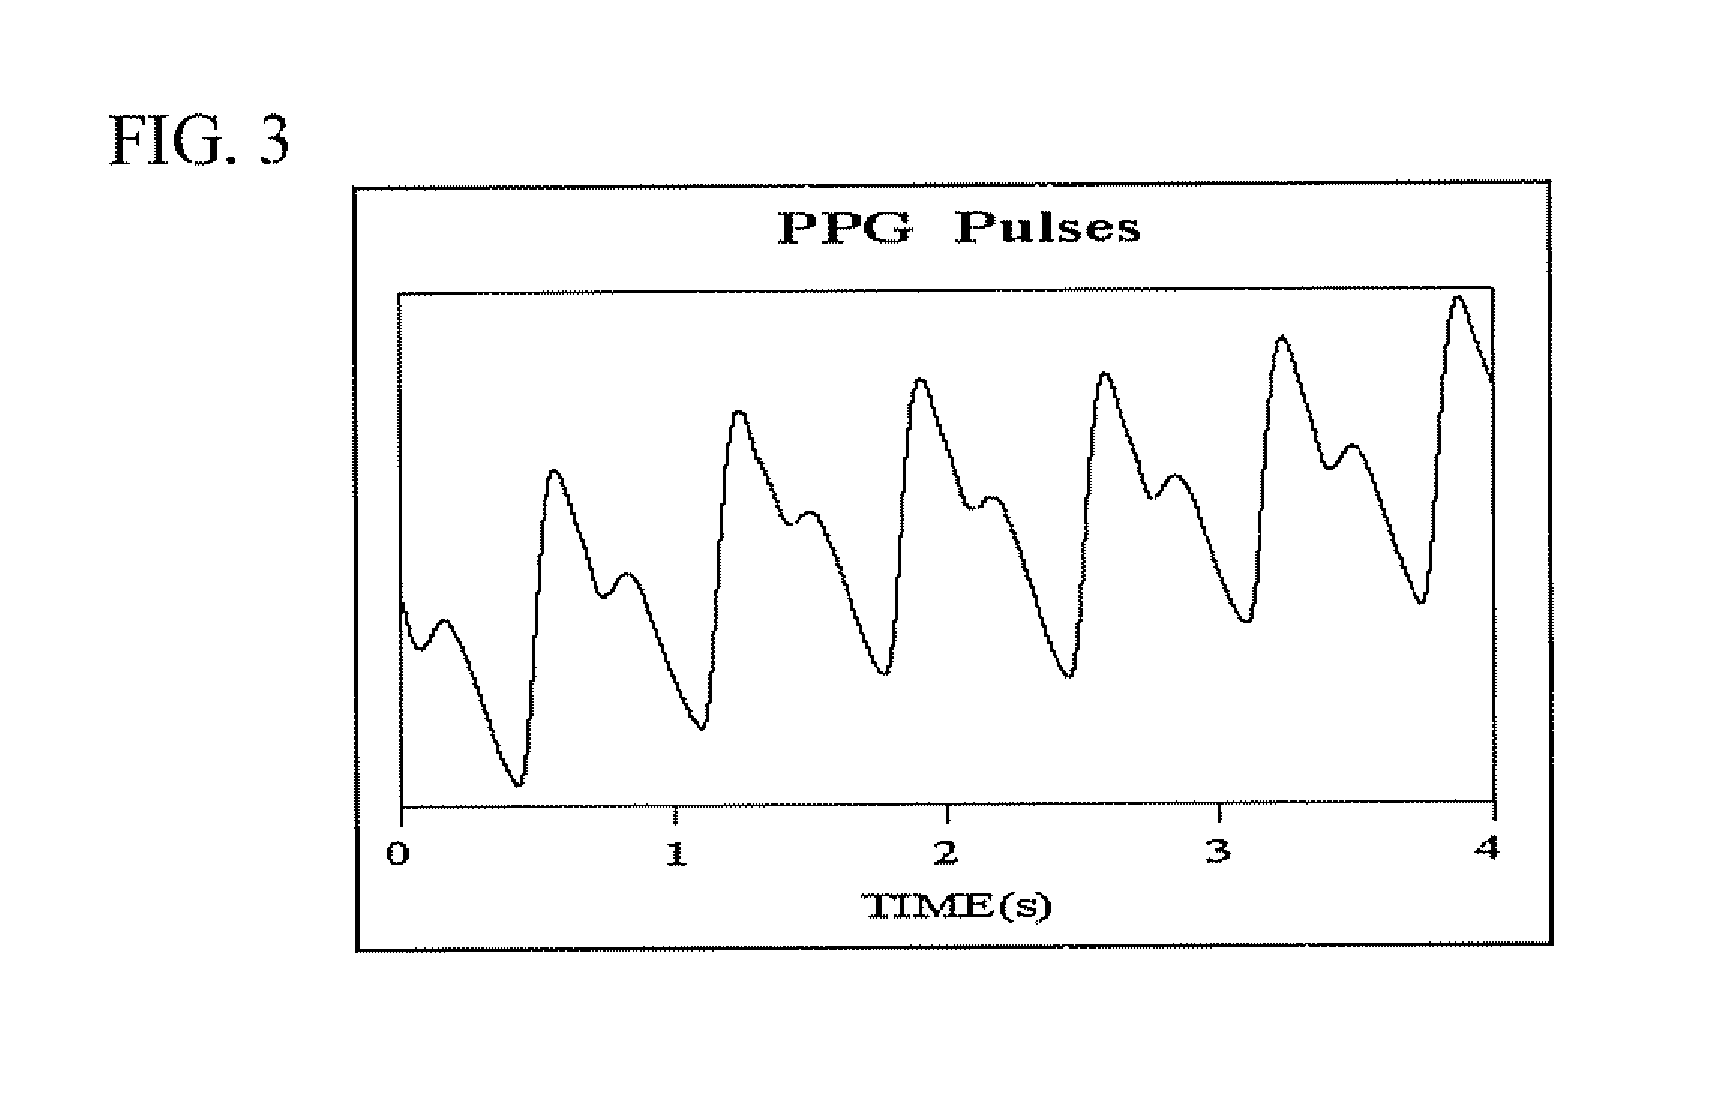 Modified Pulse Oximetry Technique For Measurement Of Oxygen Saturation In Arterial And Venous Blood